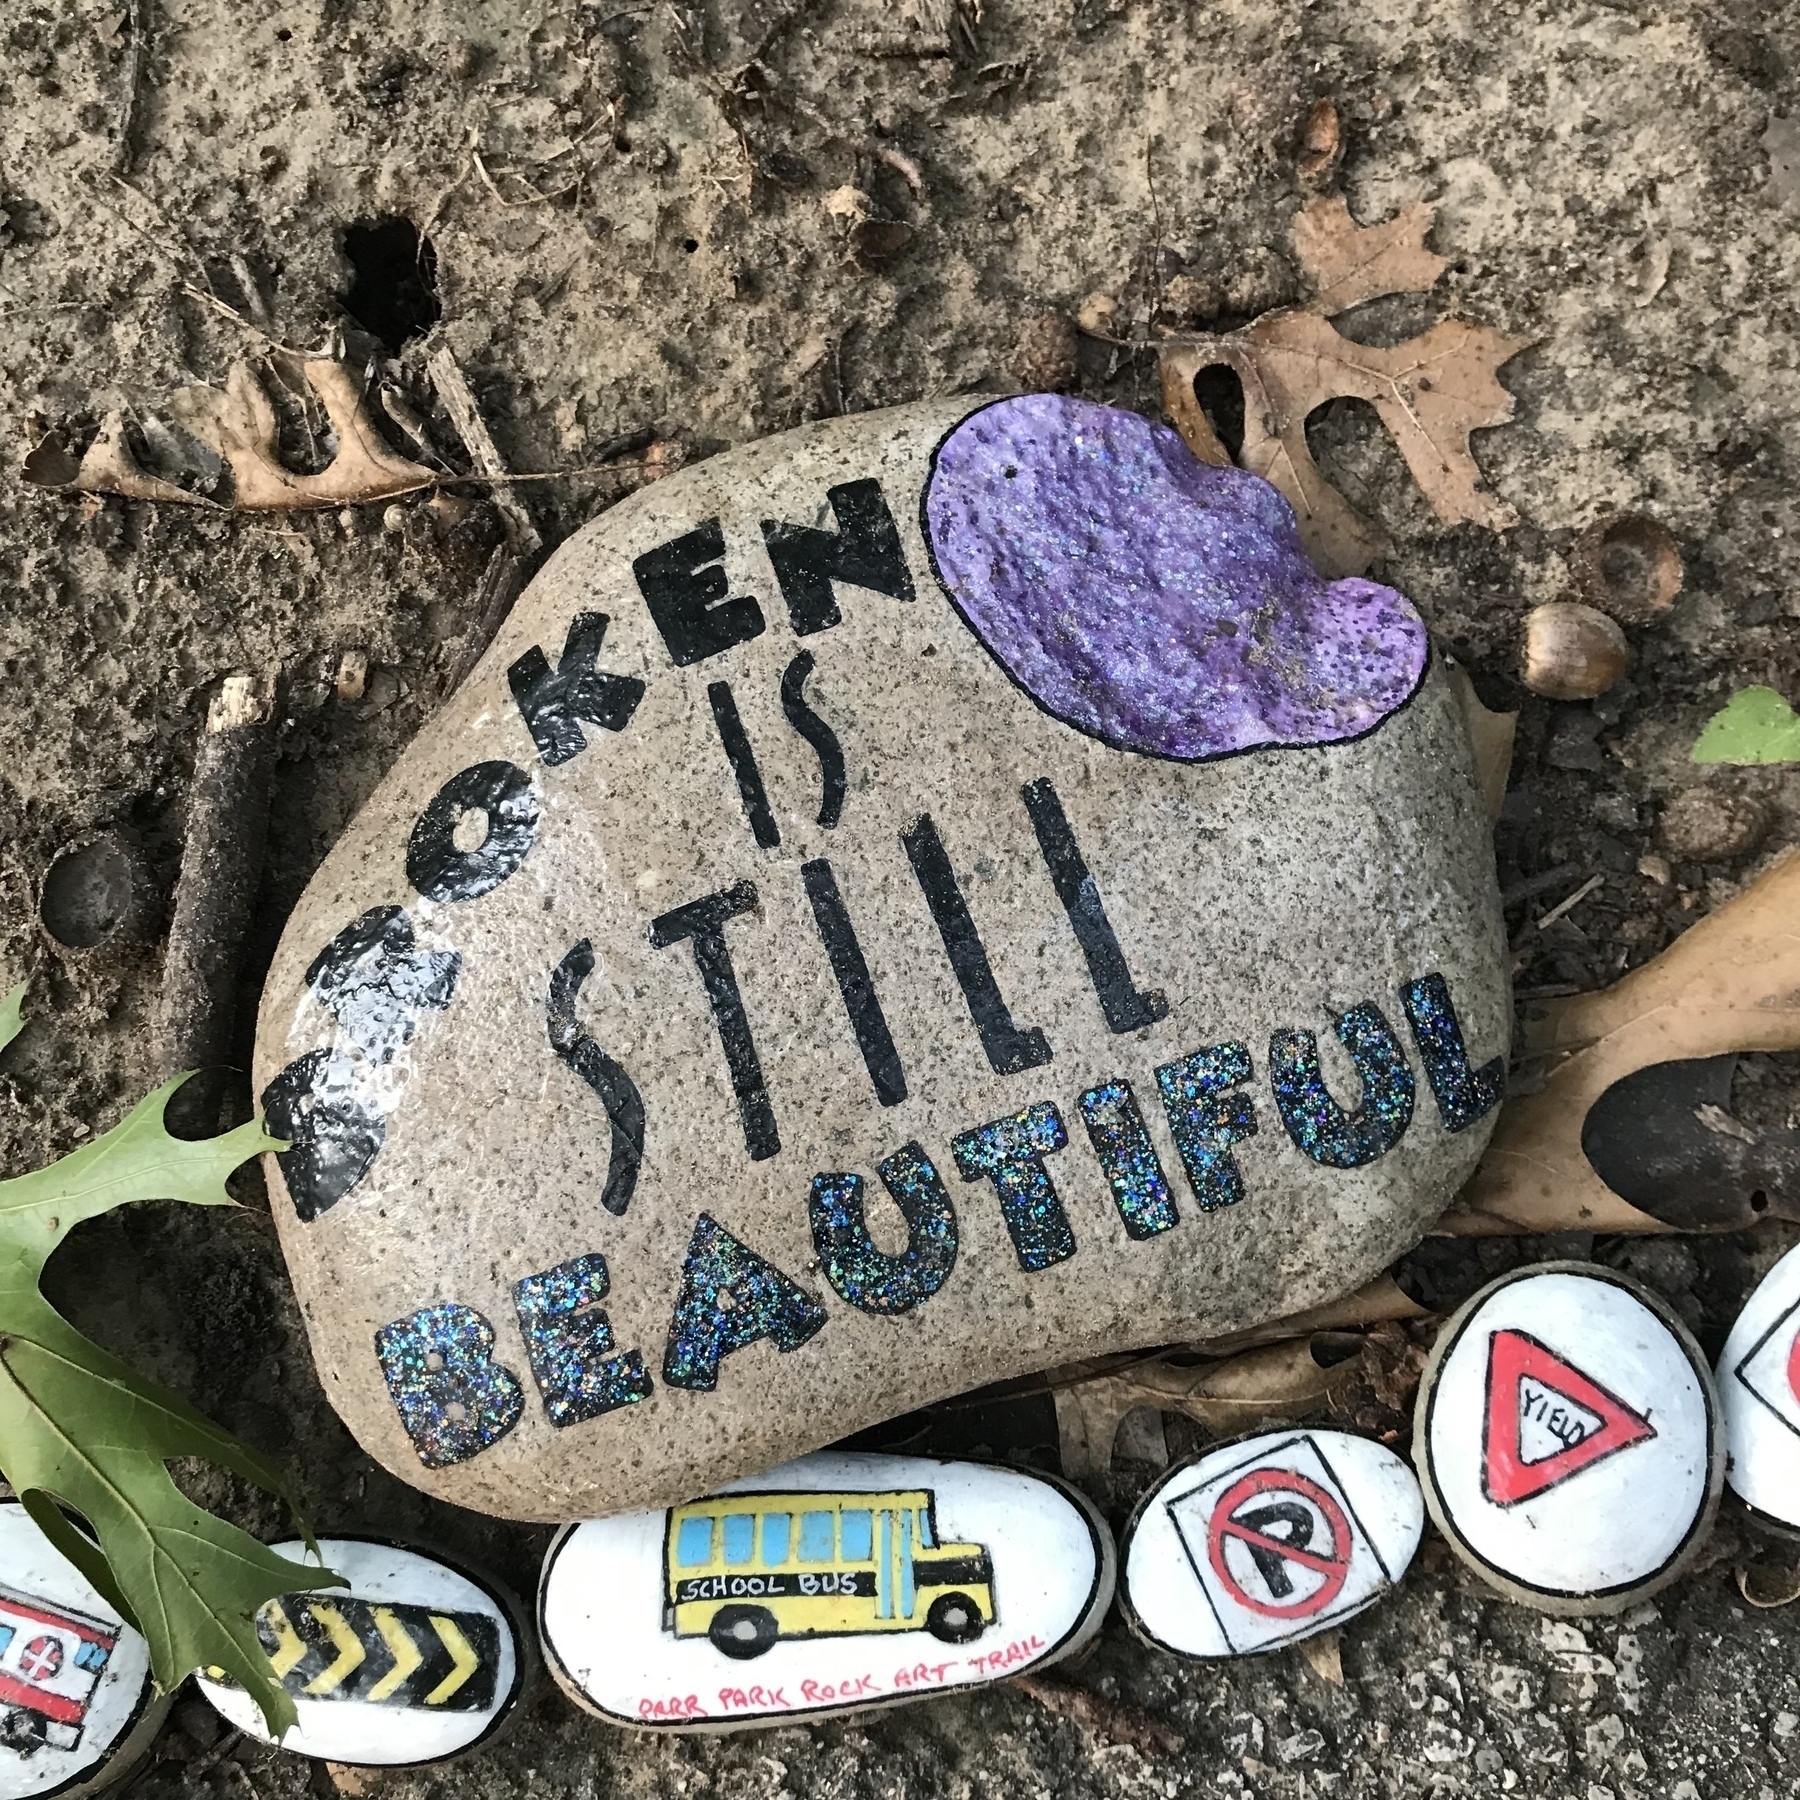 A rock at the Parr Park Rock Art Trail painted with “Broken is still beautiful”